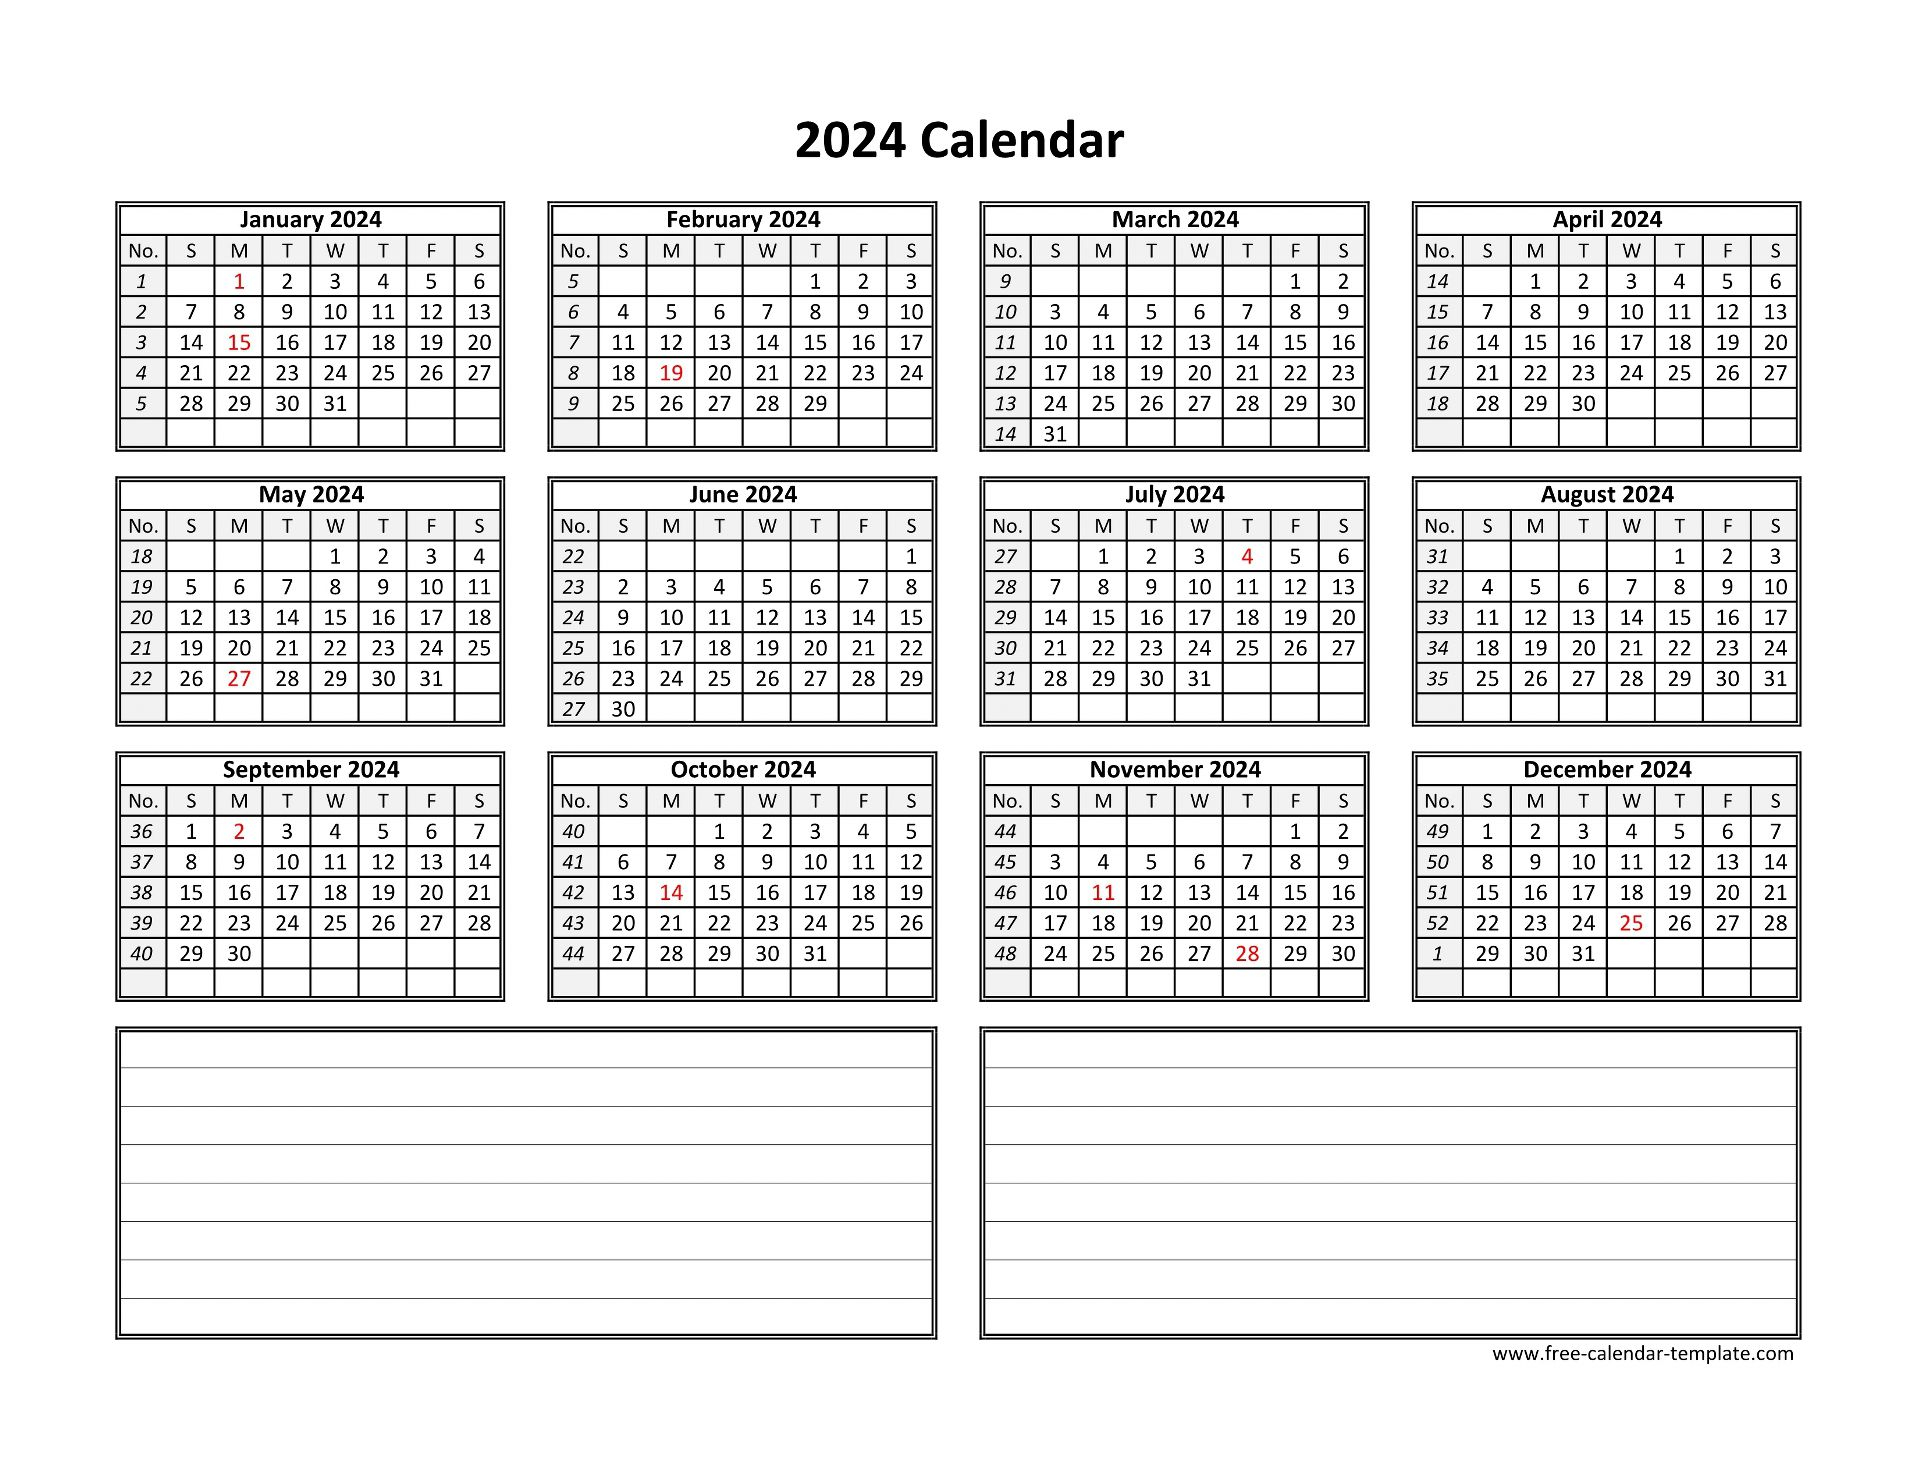 Yearly 2024 Calendar Printable With Space For Notes | Free for 2024 Calendar Printable With Notes